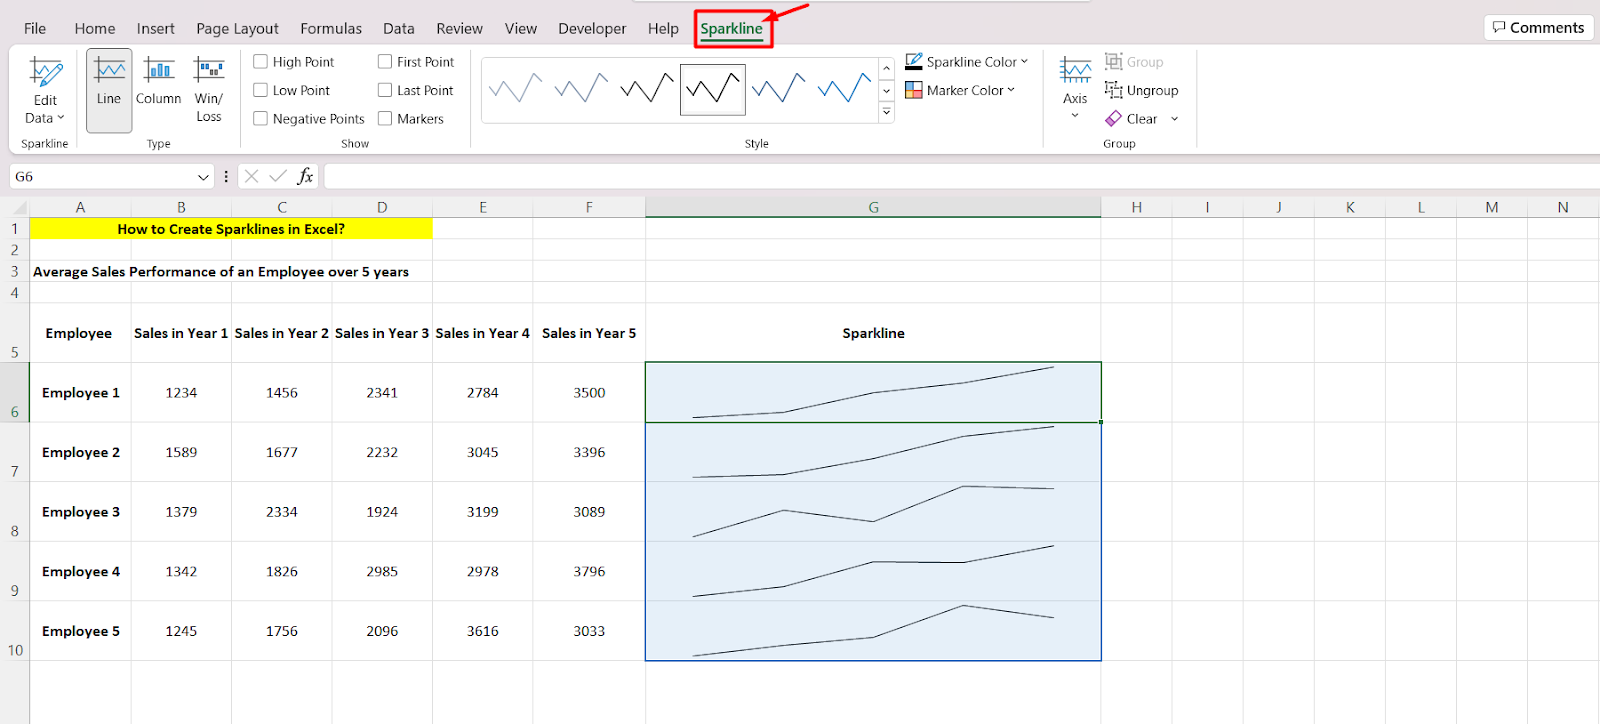 How to add sparklines in Excel - Highlighting data points in sparklines